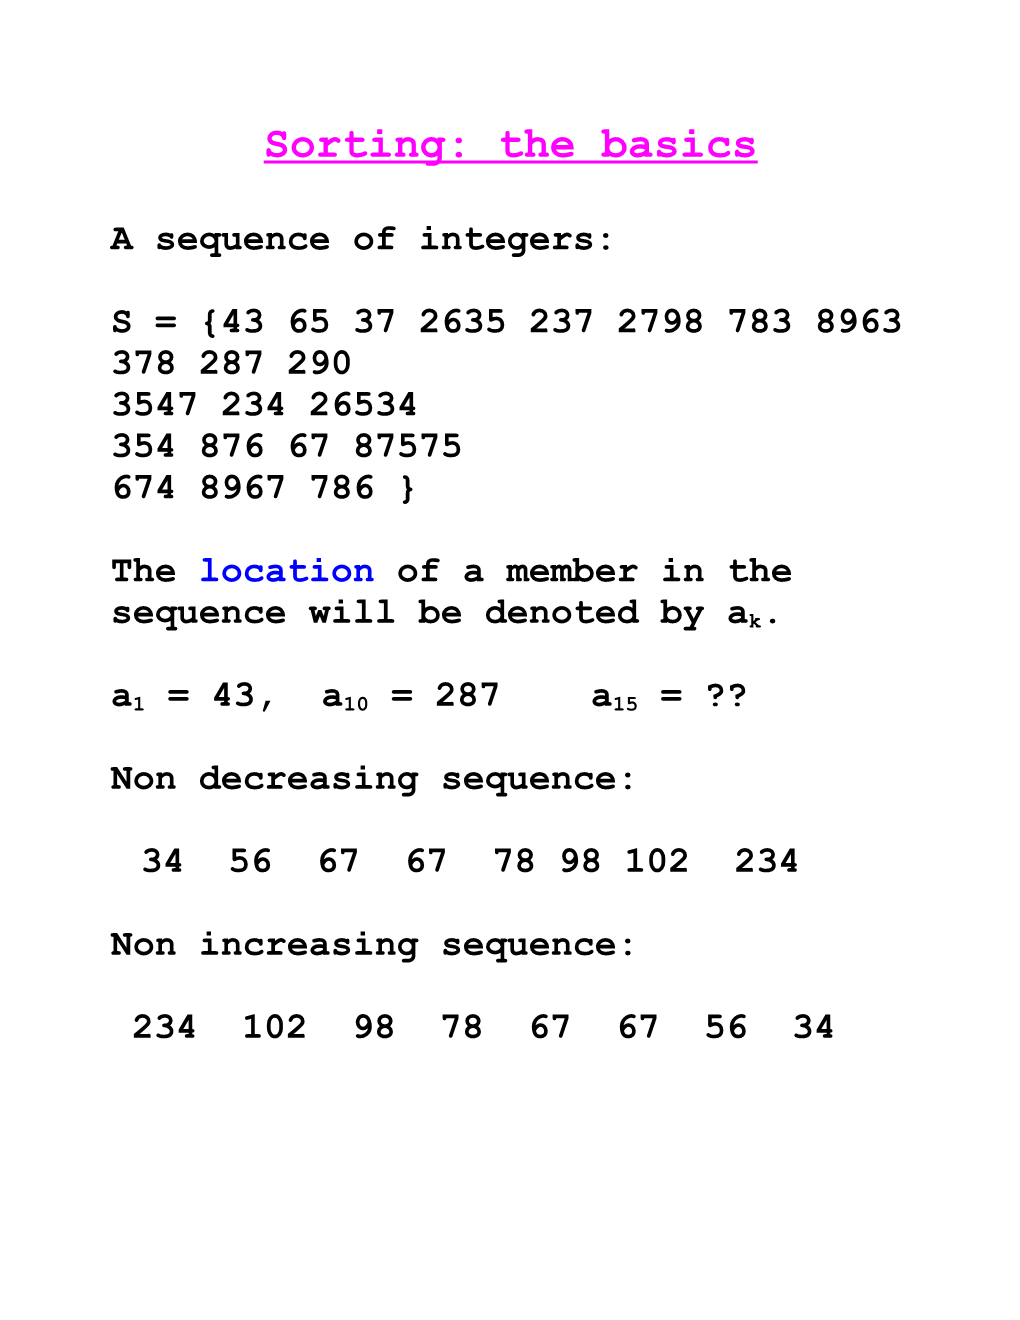 A Sequence of Integers